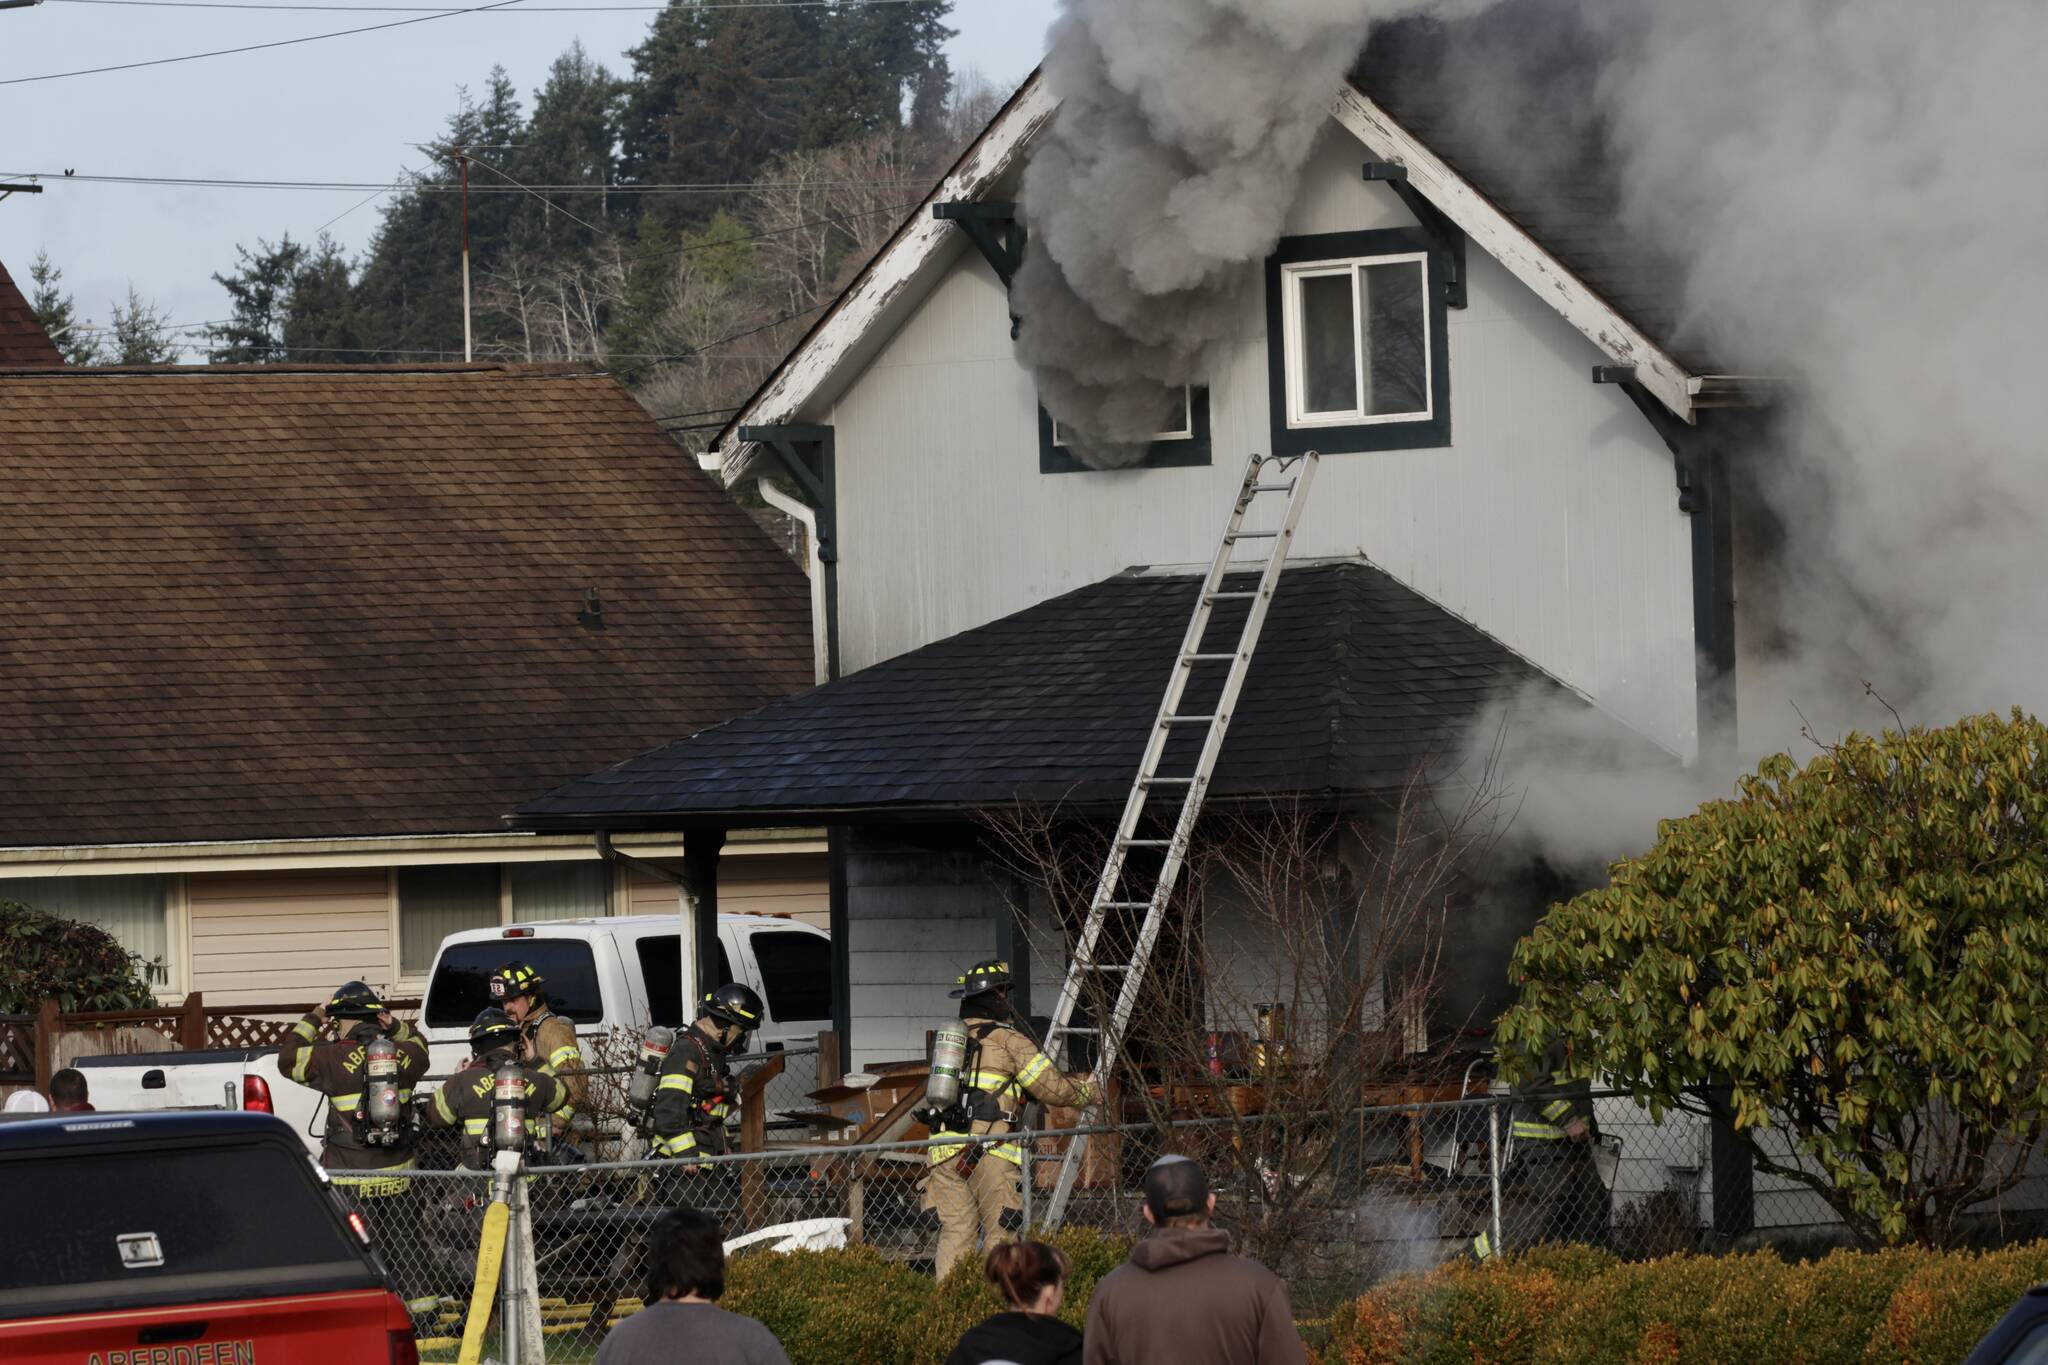 The cause of a structure fire in Hoquiam on Feb. 17 is undetermined at this time, said Hoquiam’s fire chief. (Michael S. Lockett / The Daily World)